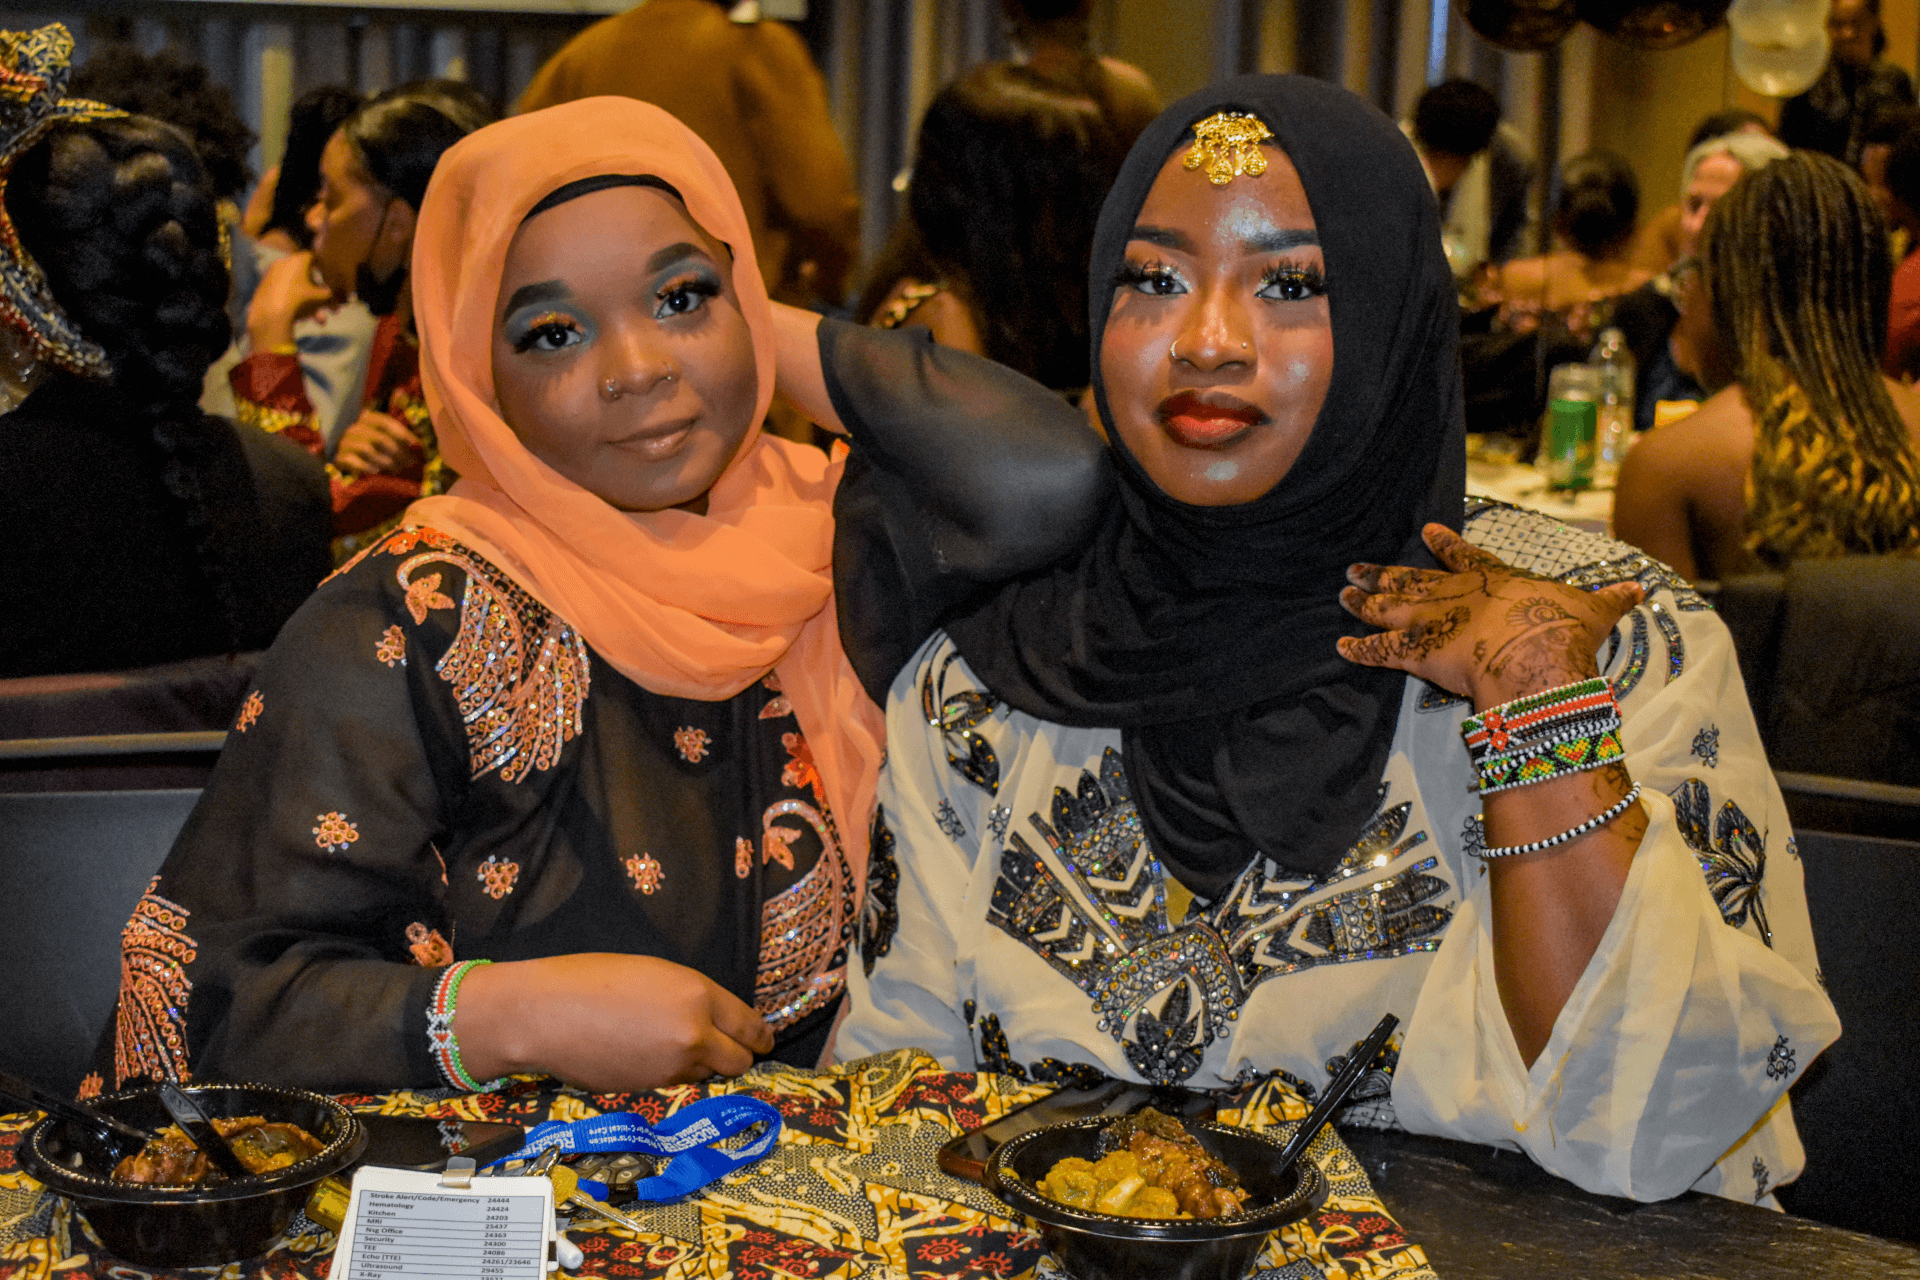 Two students sitting at an event with food